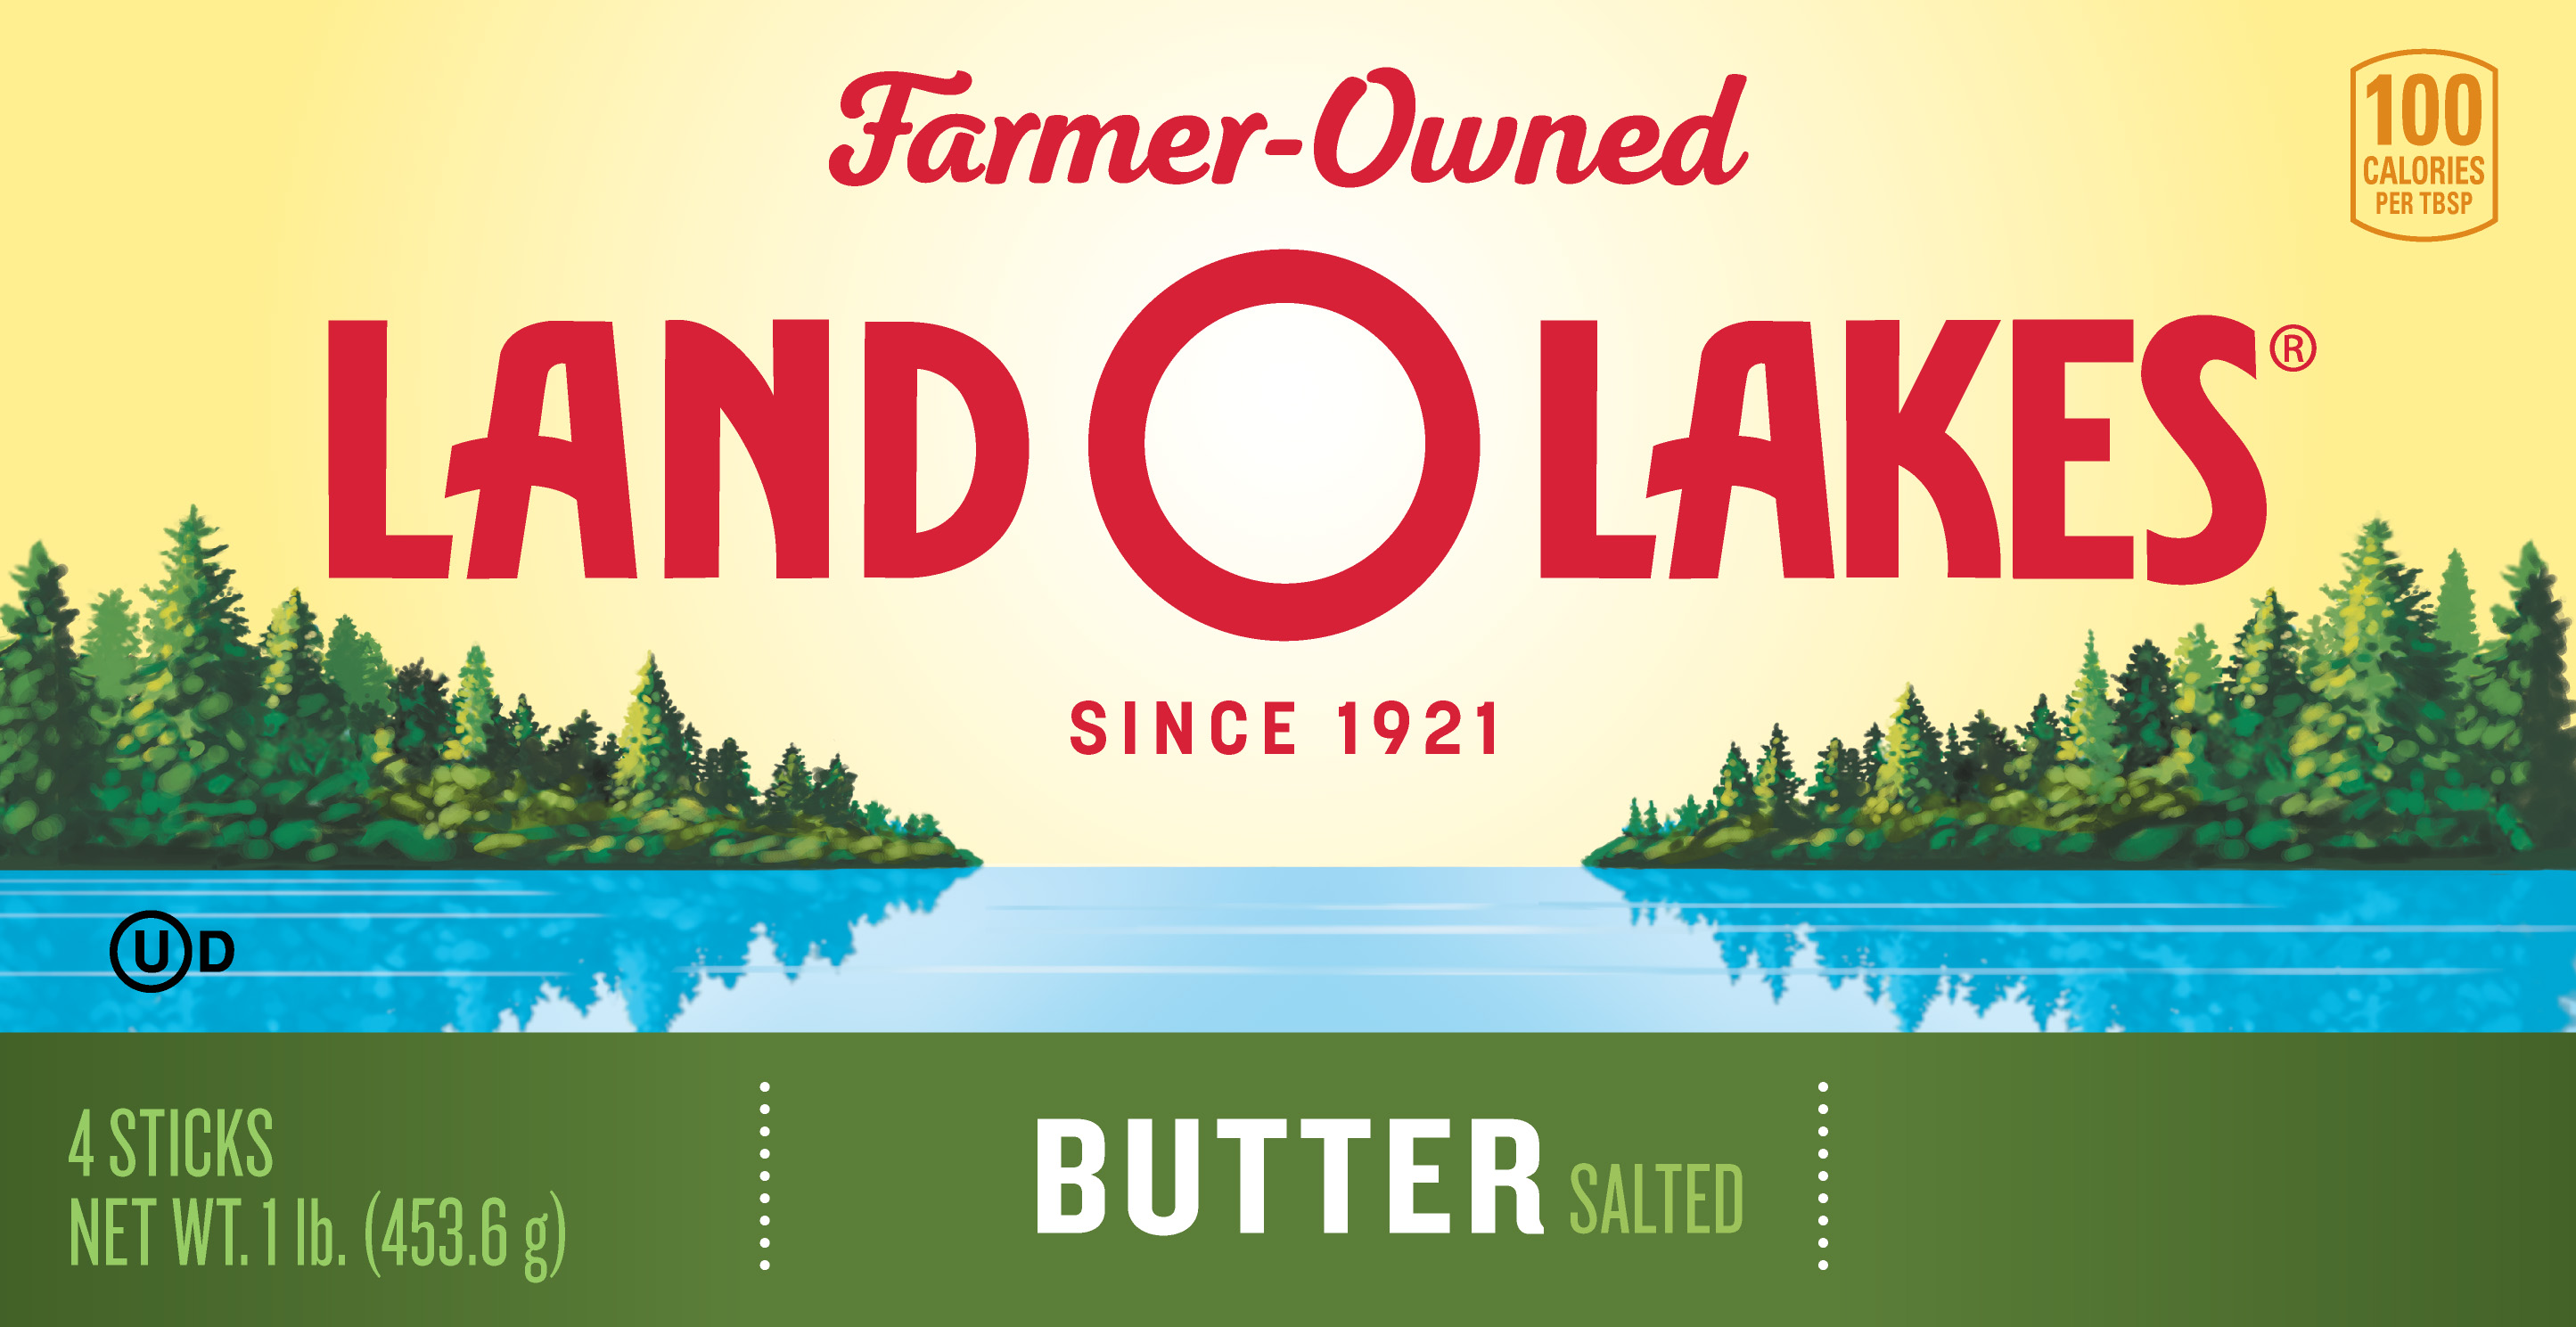 Farmer-owned cooperative Land O'Lakes, Inc. unveils new packaging celebrating farmers ahead of 100th anniversary